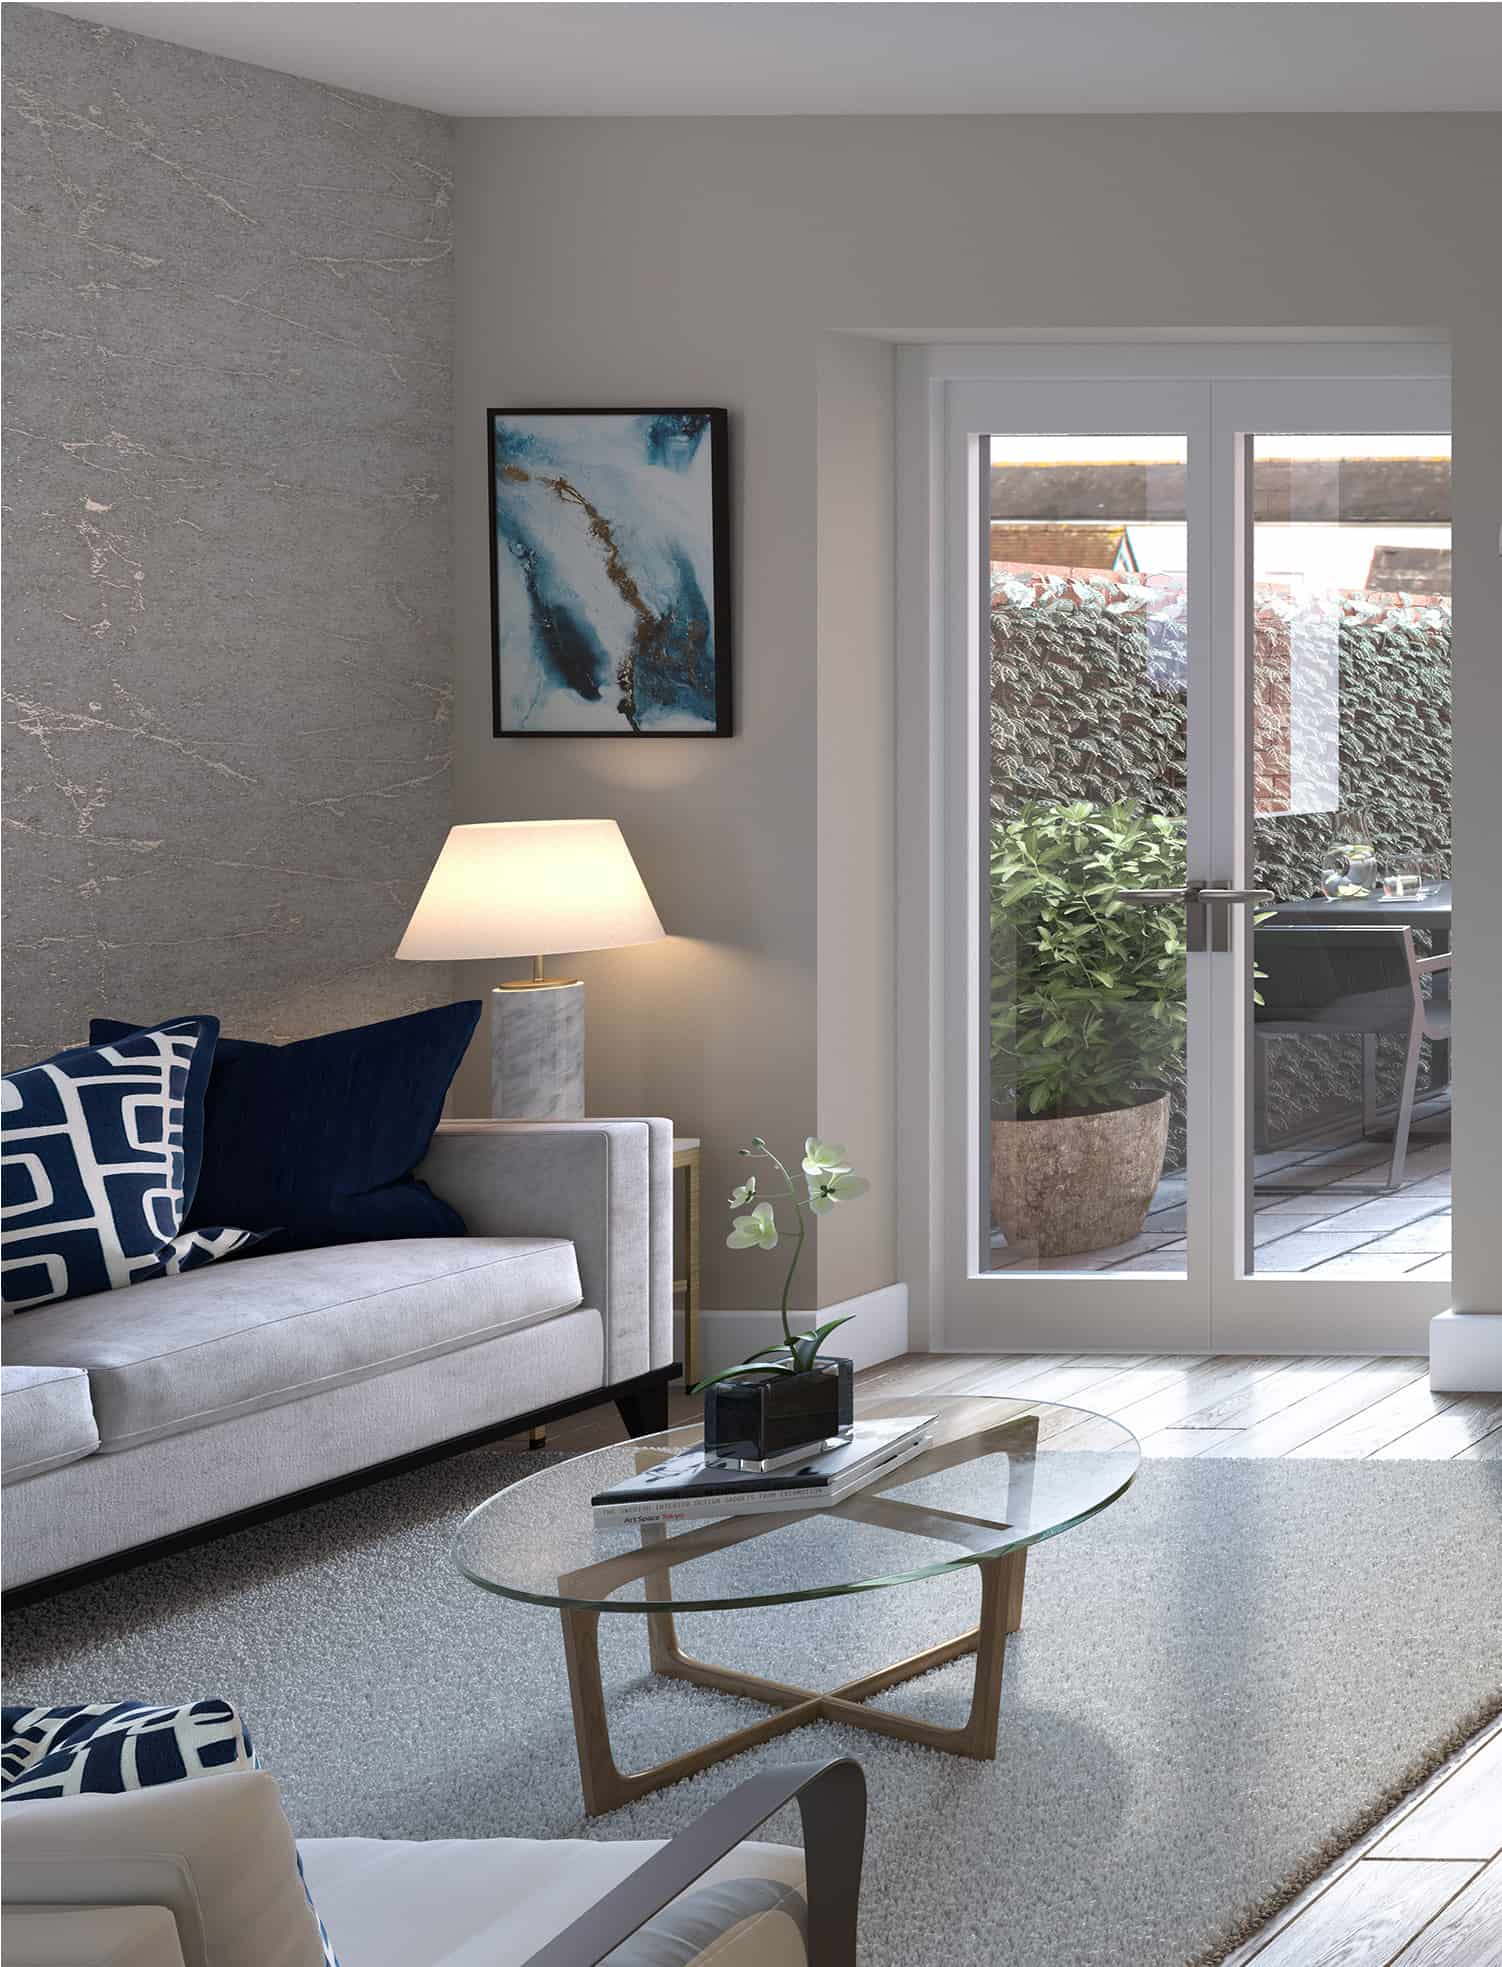 St Pancras Basingstoke CGI Image Interior: Commercial to Residential Property Conversion Apartment